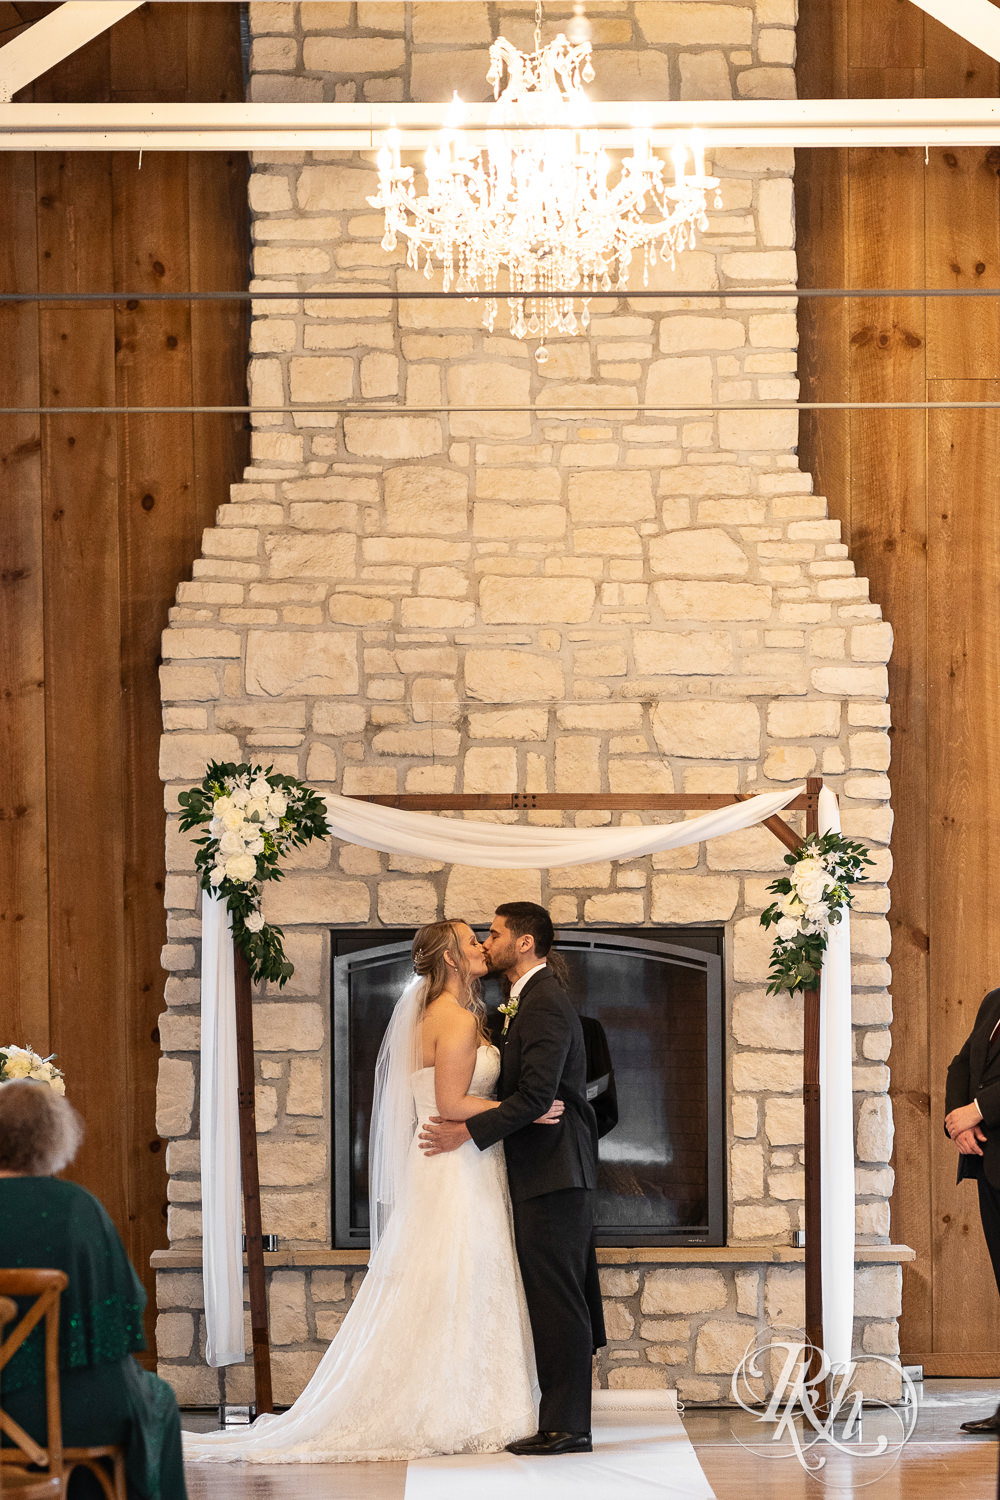 Bride and groom kiss during wedding ceremony at Almquist Farm in Hastings, Minnesota.